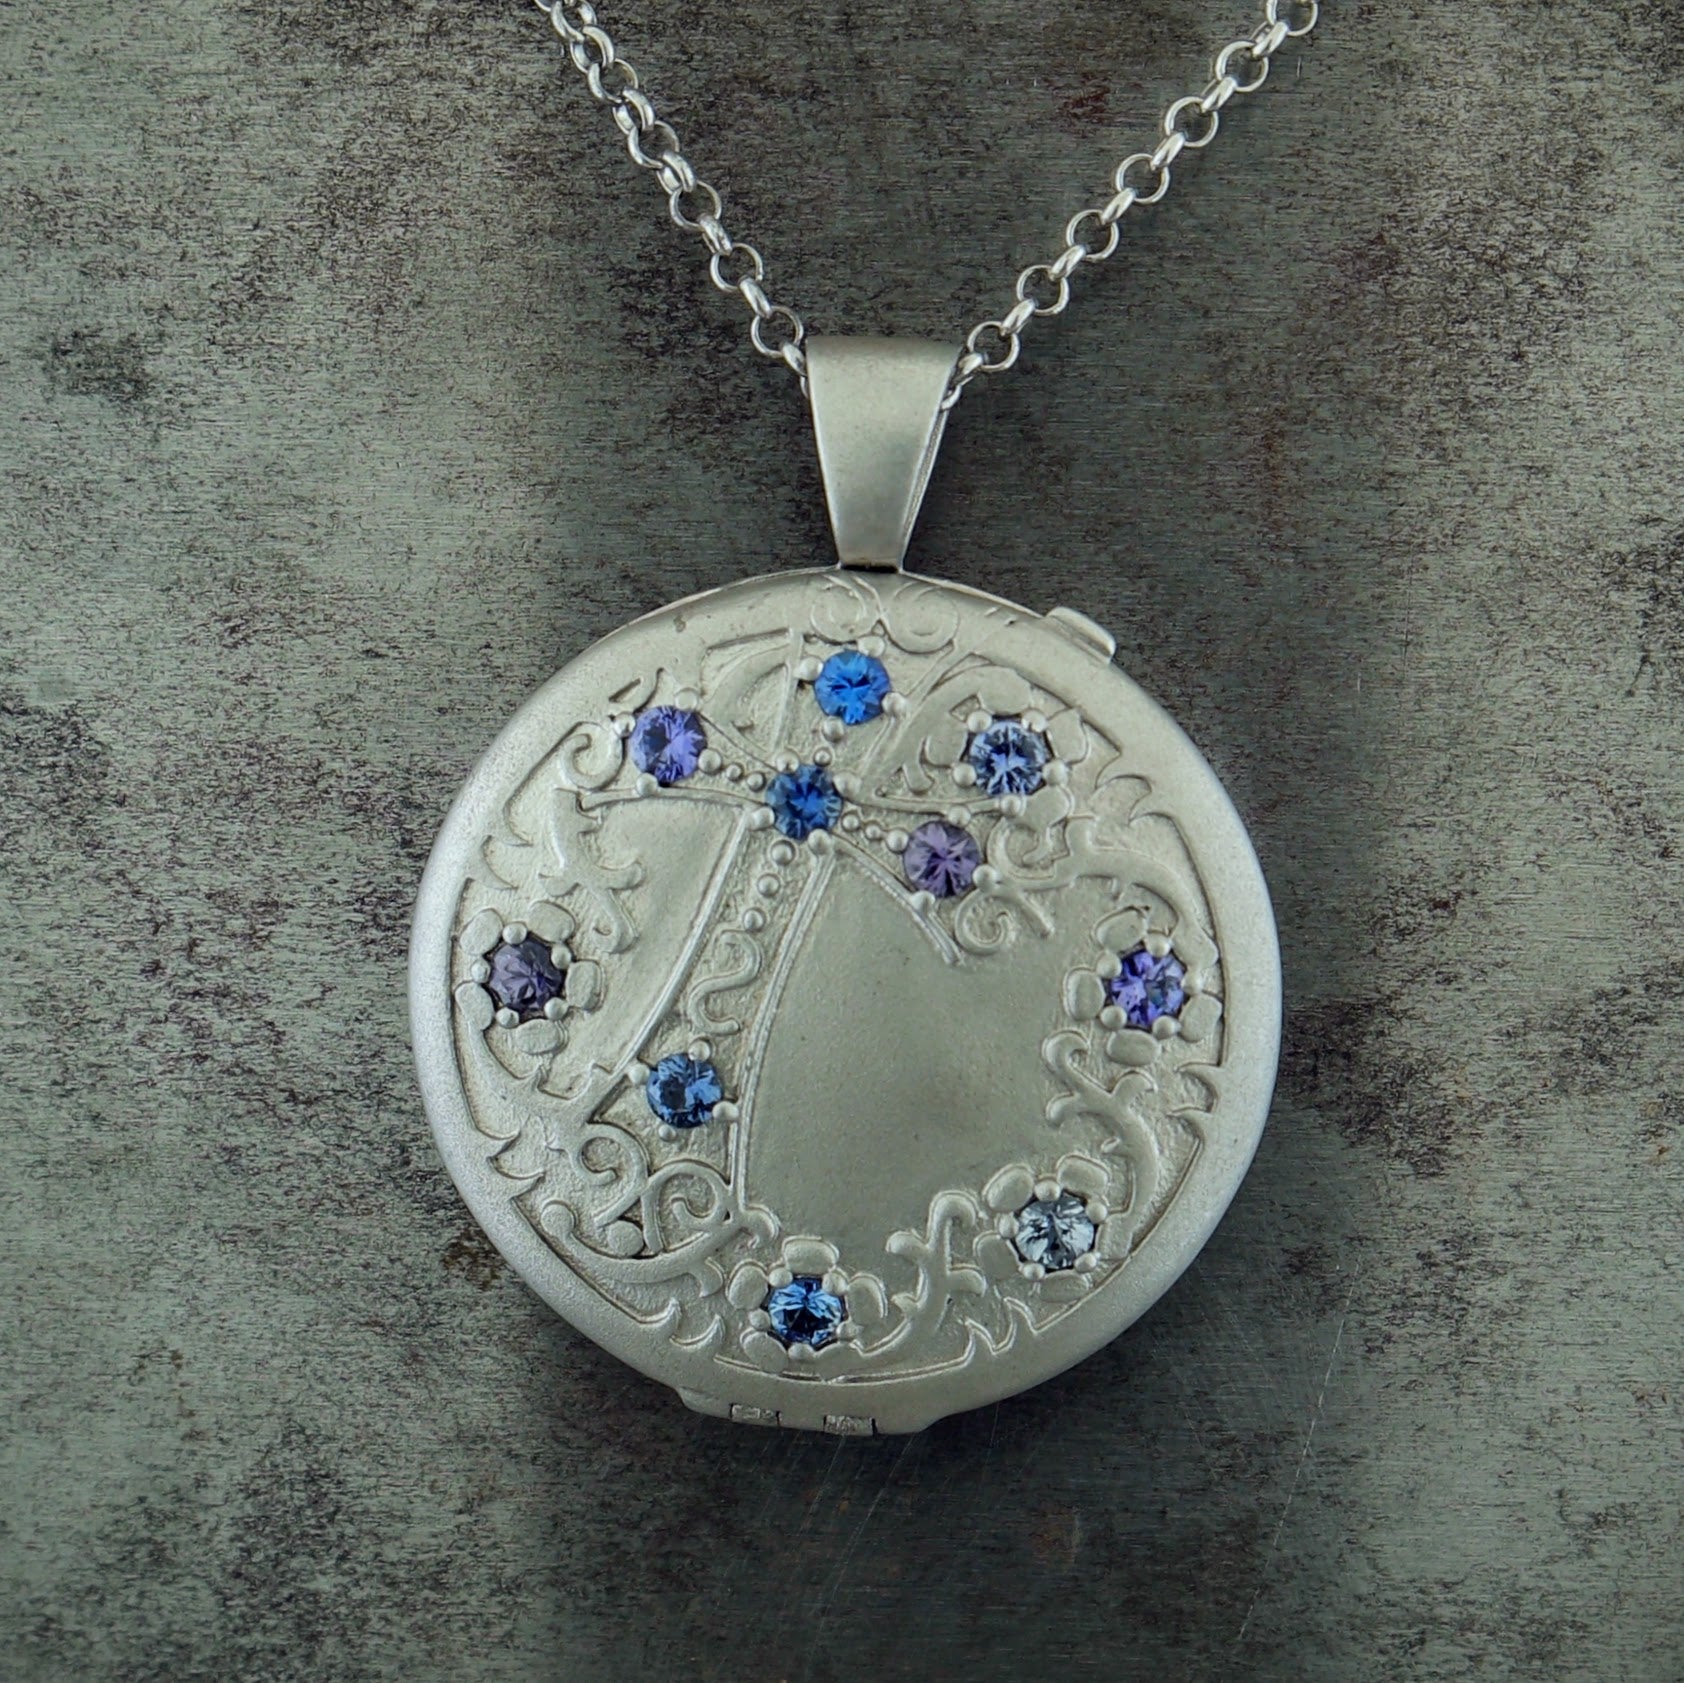 Close up view of pendant on sterling silver sapphire locket. A round locket with an engraving of a cross going diagonally across the locket with Celtic motifs surrounding the perimeter of the locket. There are ten round blue-violet sapphires set into the surface. Five of them reside within the cross; one at each end and one where all the lines intersect. The remaining five create a circle within the Celtic motifs. Pendant features a bail.